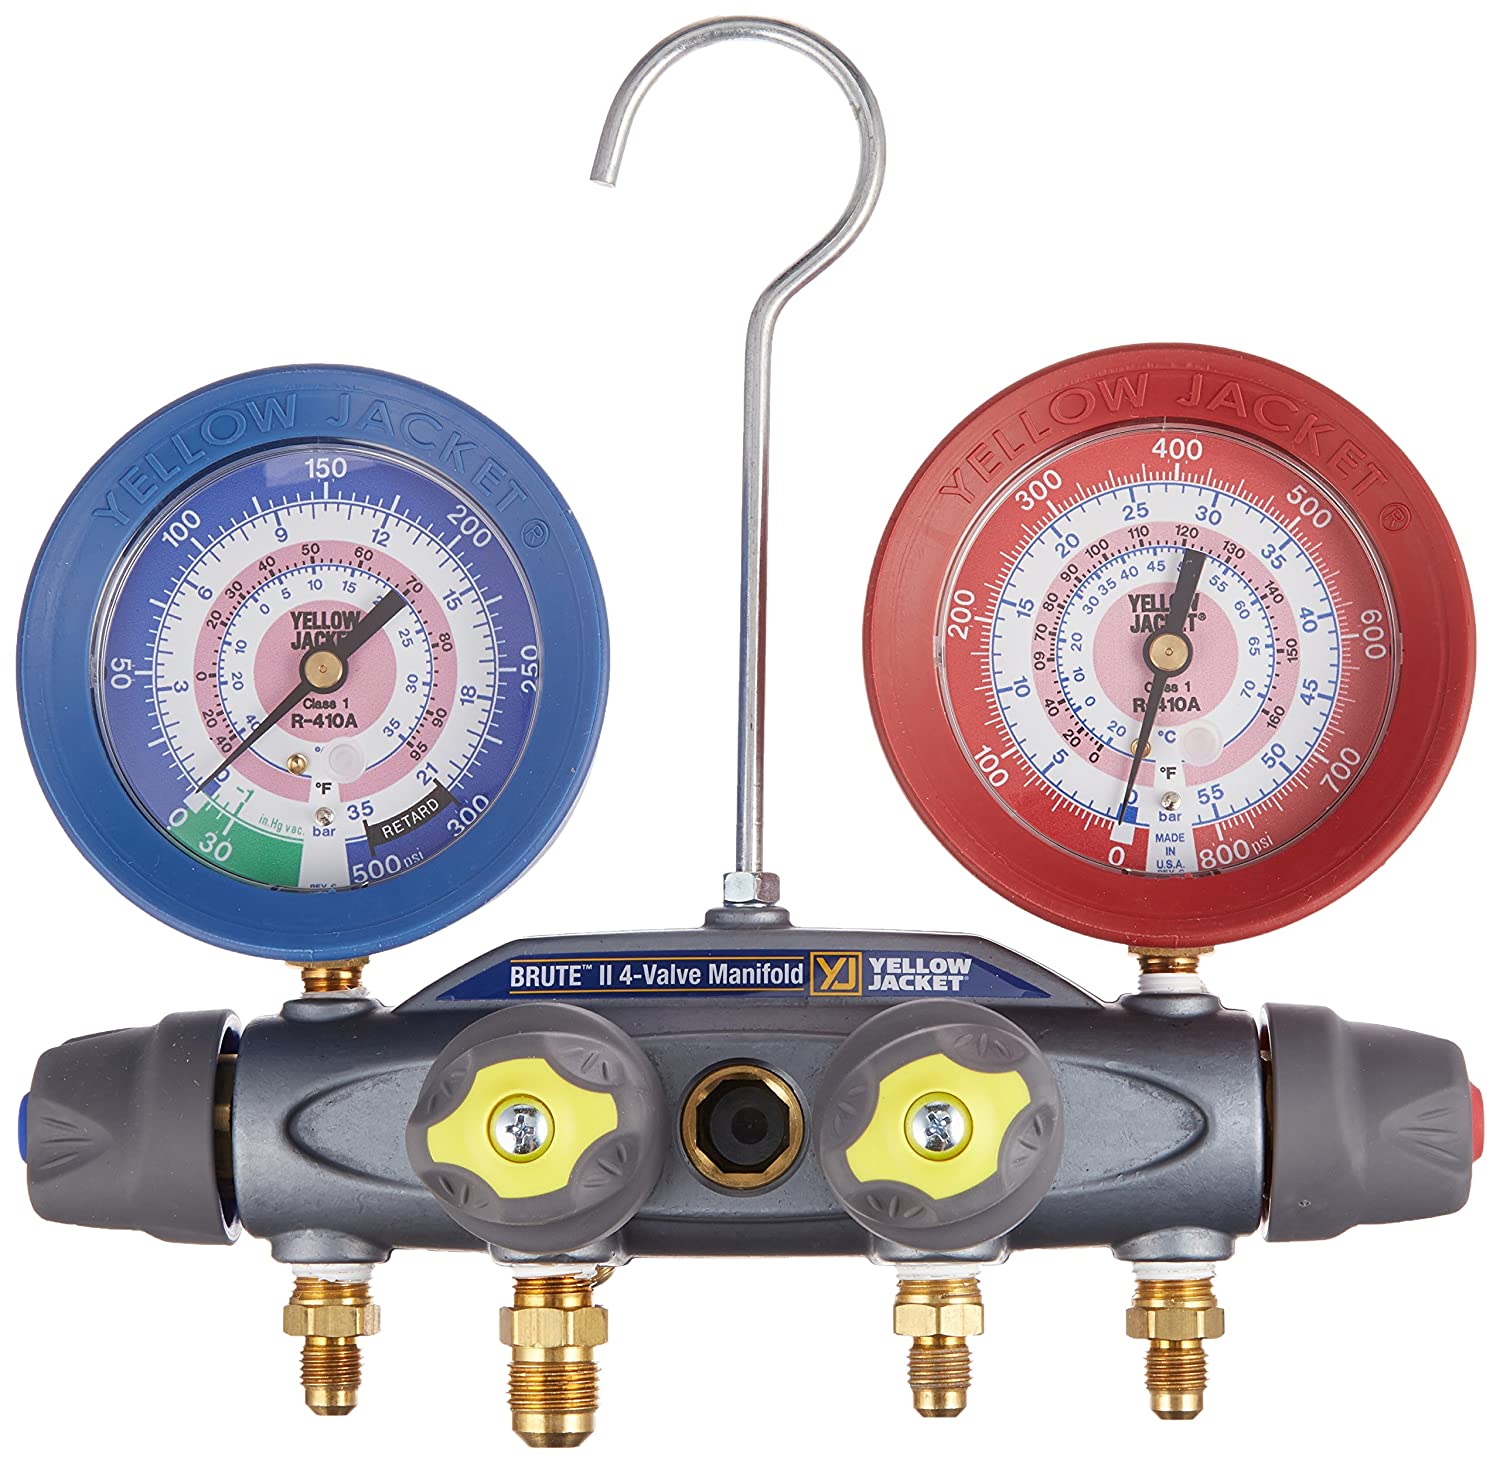 Yellow Jacket 46010 Brute II 4-Valve Manifold with Red/Blue Gauges, bar/psi, R-22/404A/410A